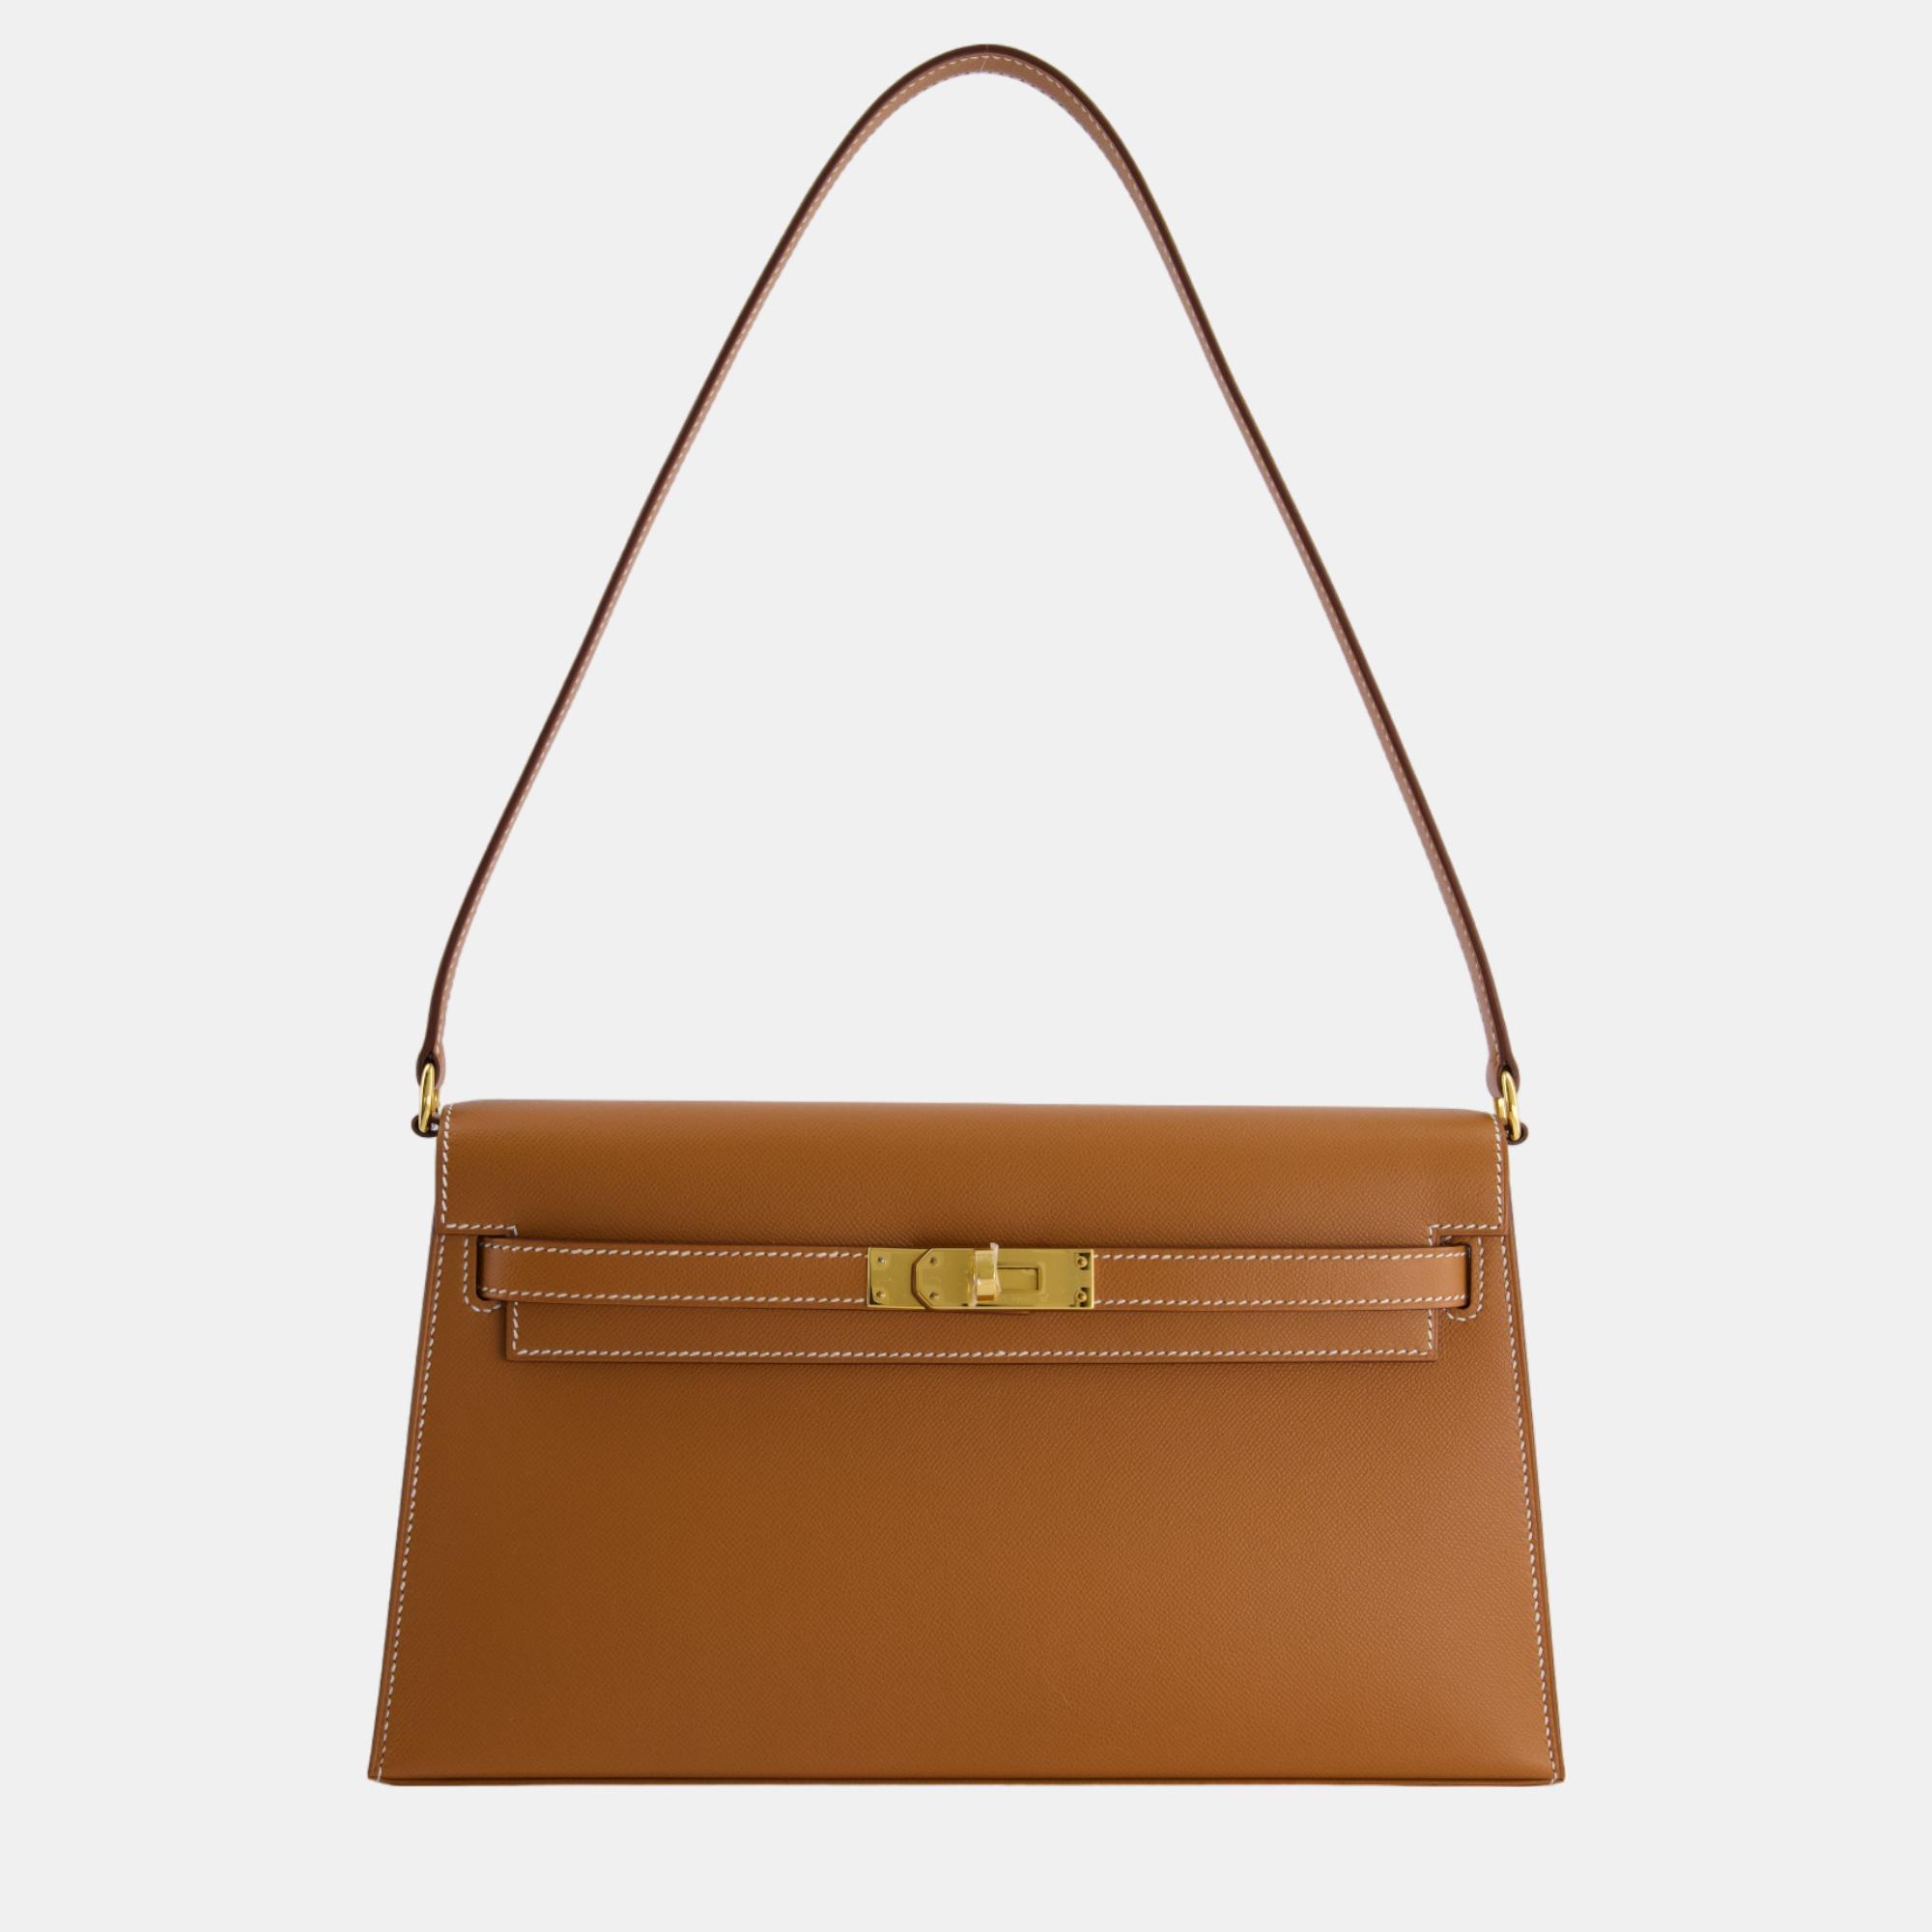 Hermes kelly elan bag in gold madame leather with gold hardware